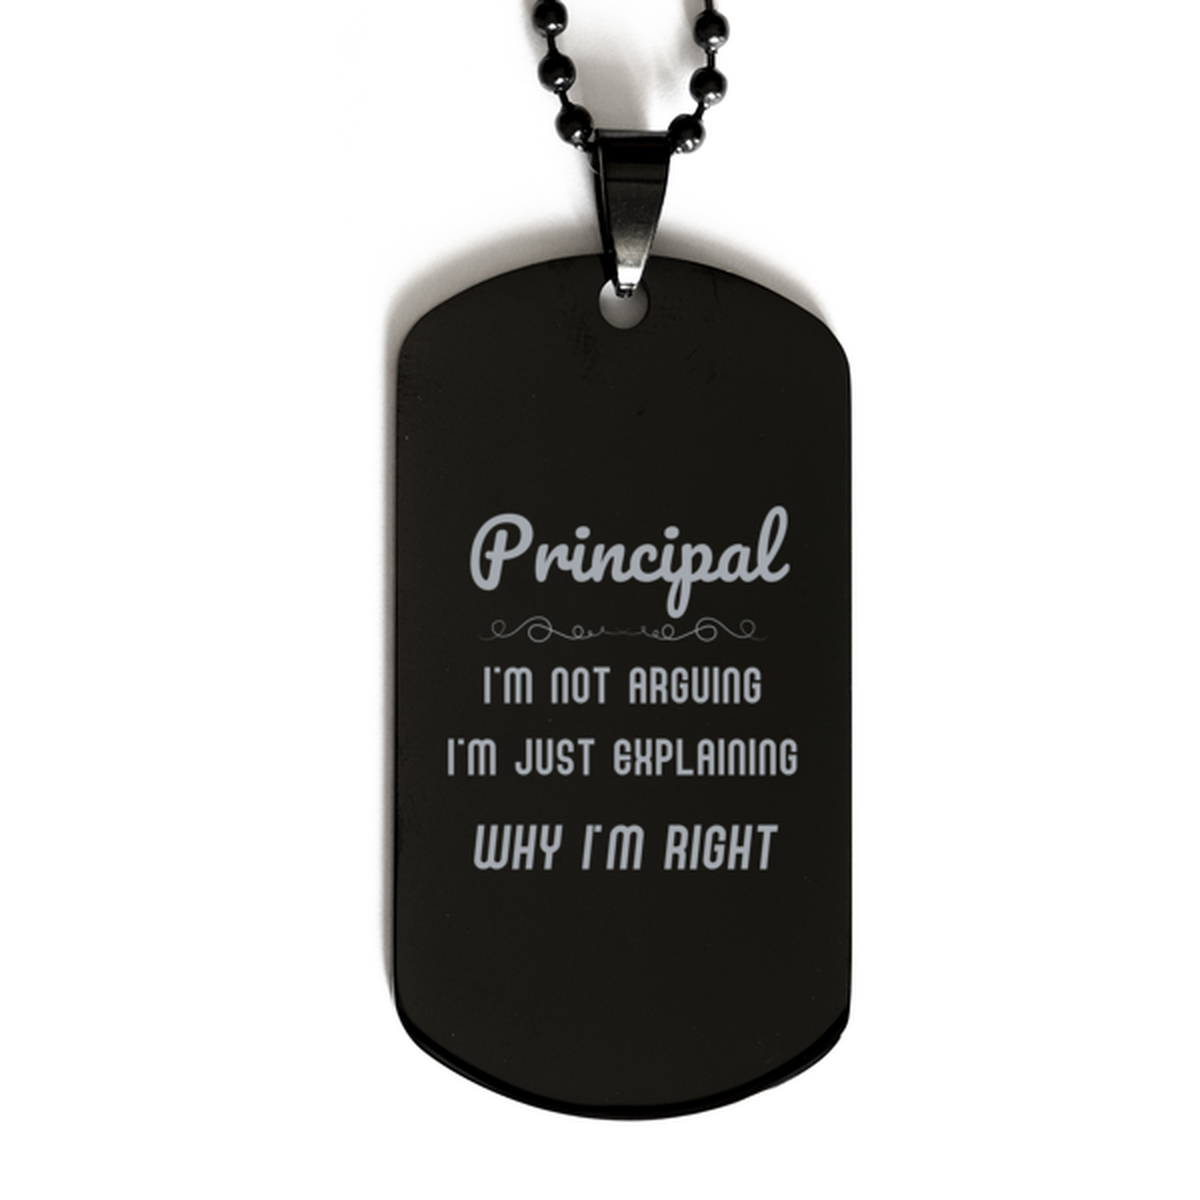 Principal I'm not Arguing. I'm Just Explaining Why I'm RIGHT Black Dog Tag, Funny Saying Quote Principal Gifts For Principal Graduation Birthday Christmas Gifts for Men Women Coworker